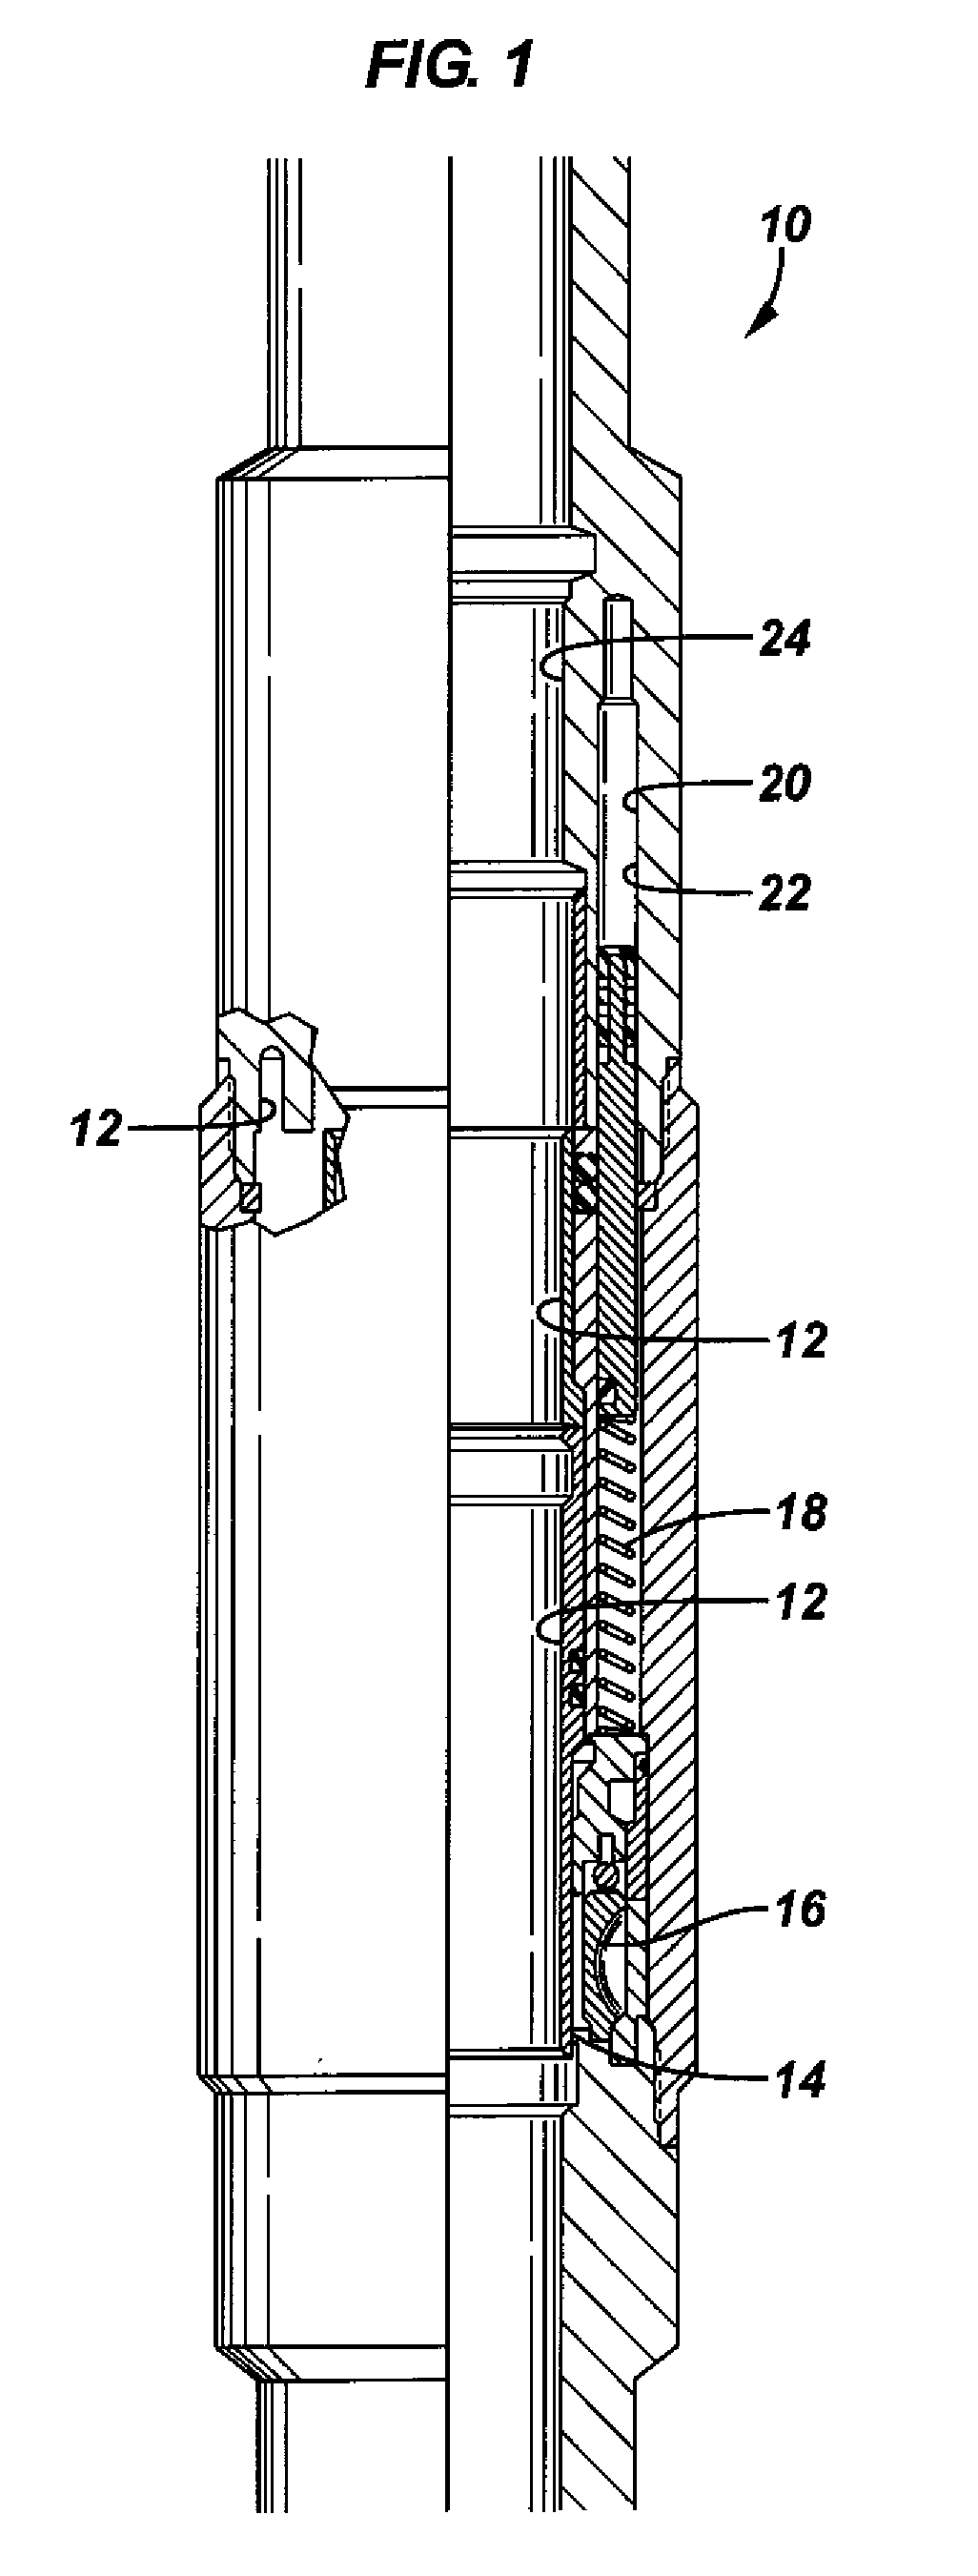 Downhole oilfield apparatus comprising a diamond-like carbon coating and methods of use